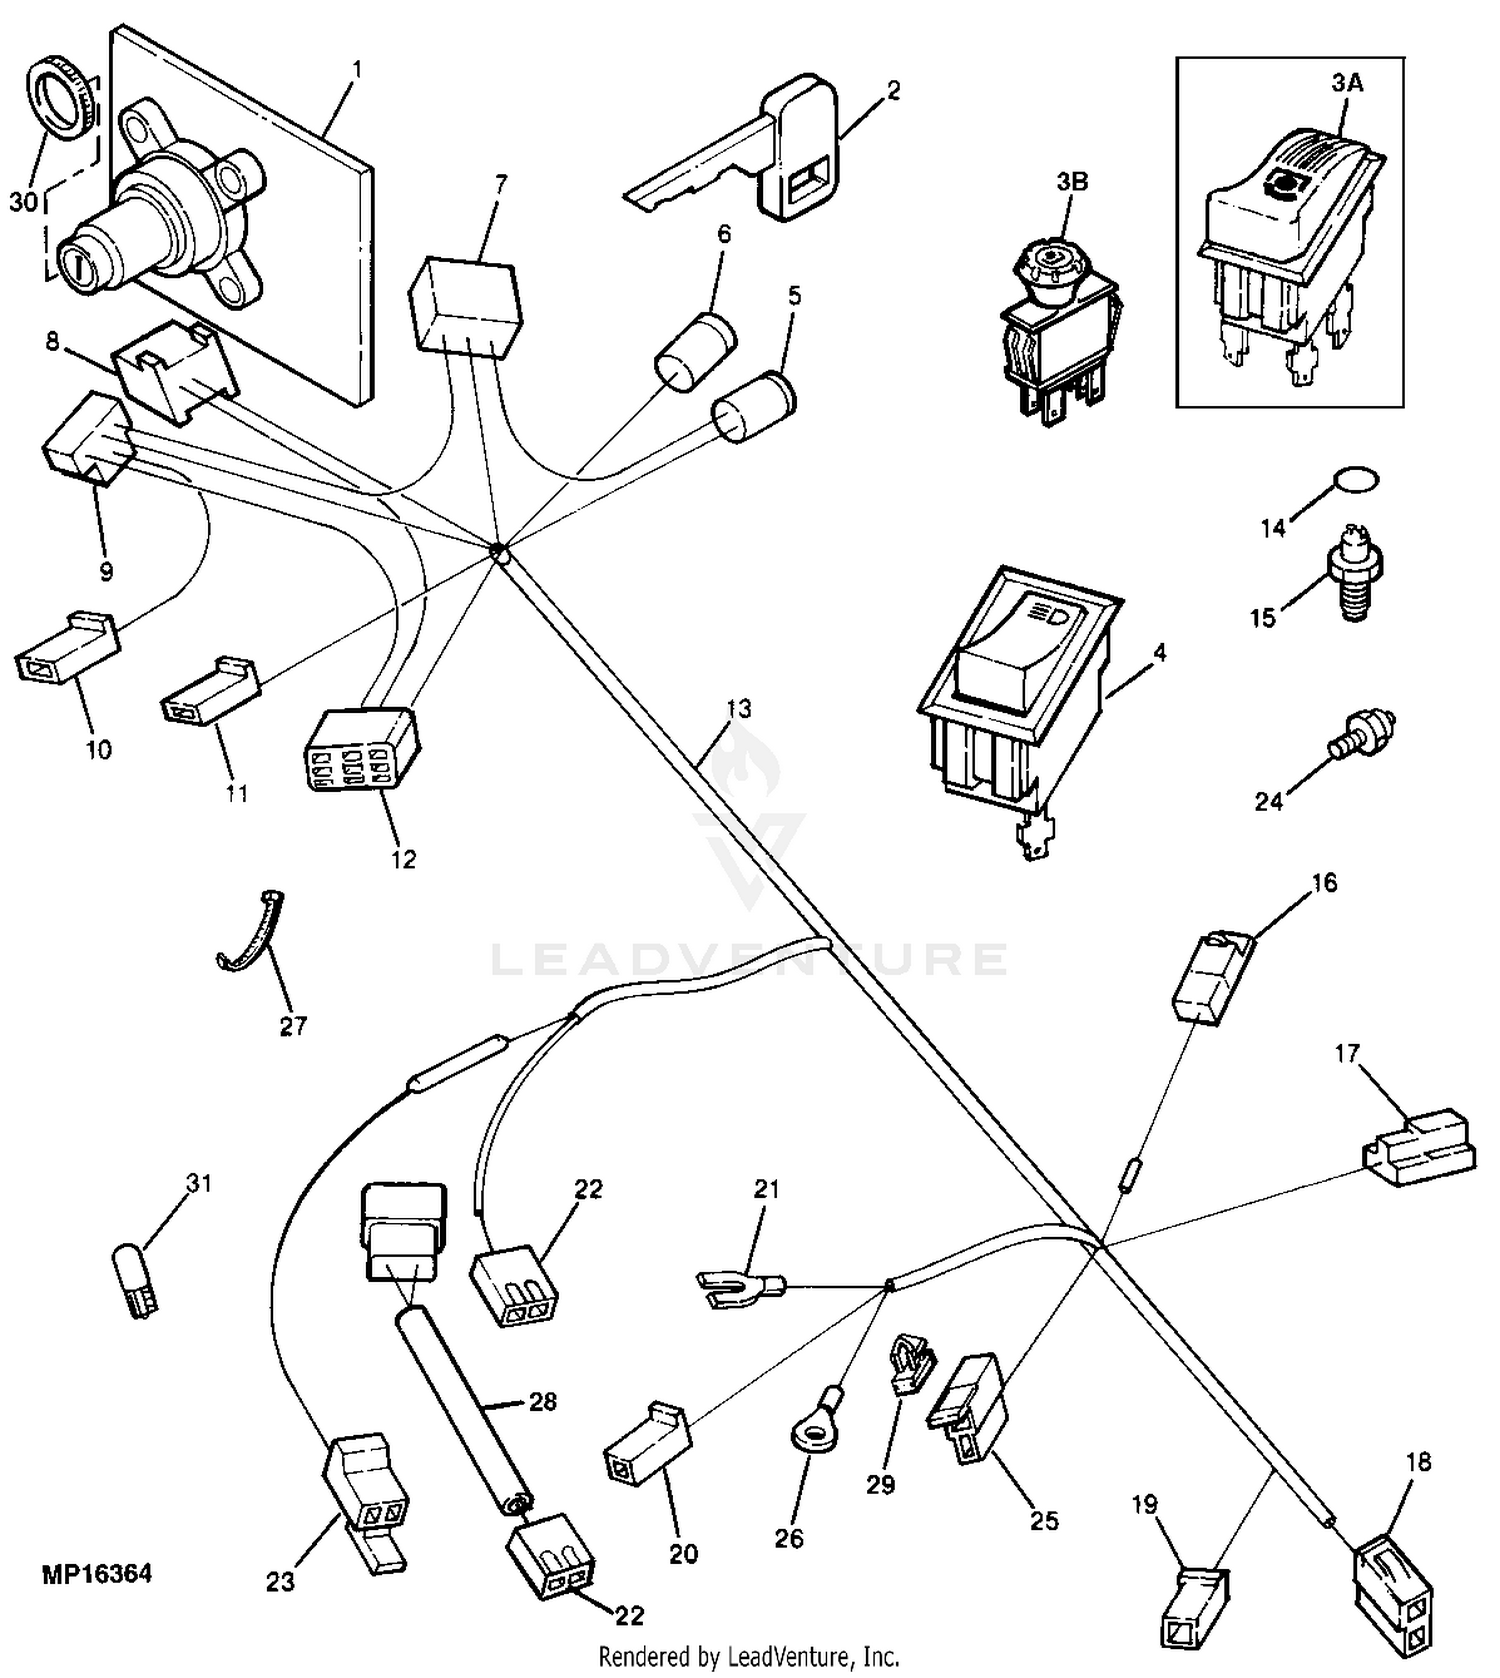 Wiring diagrams for Deere Tractor product identification number is  L06200H150106